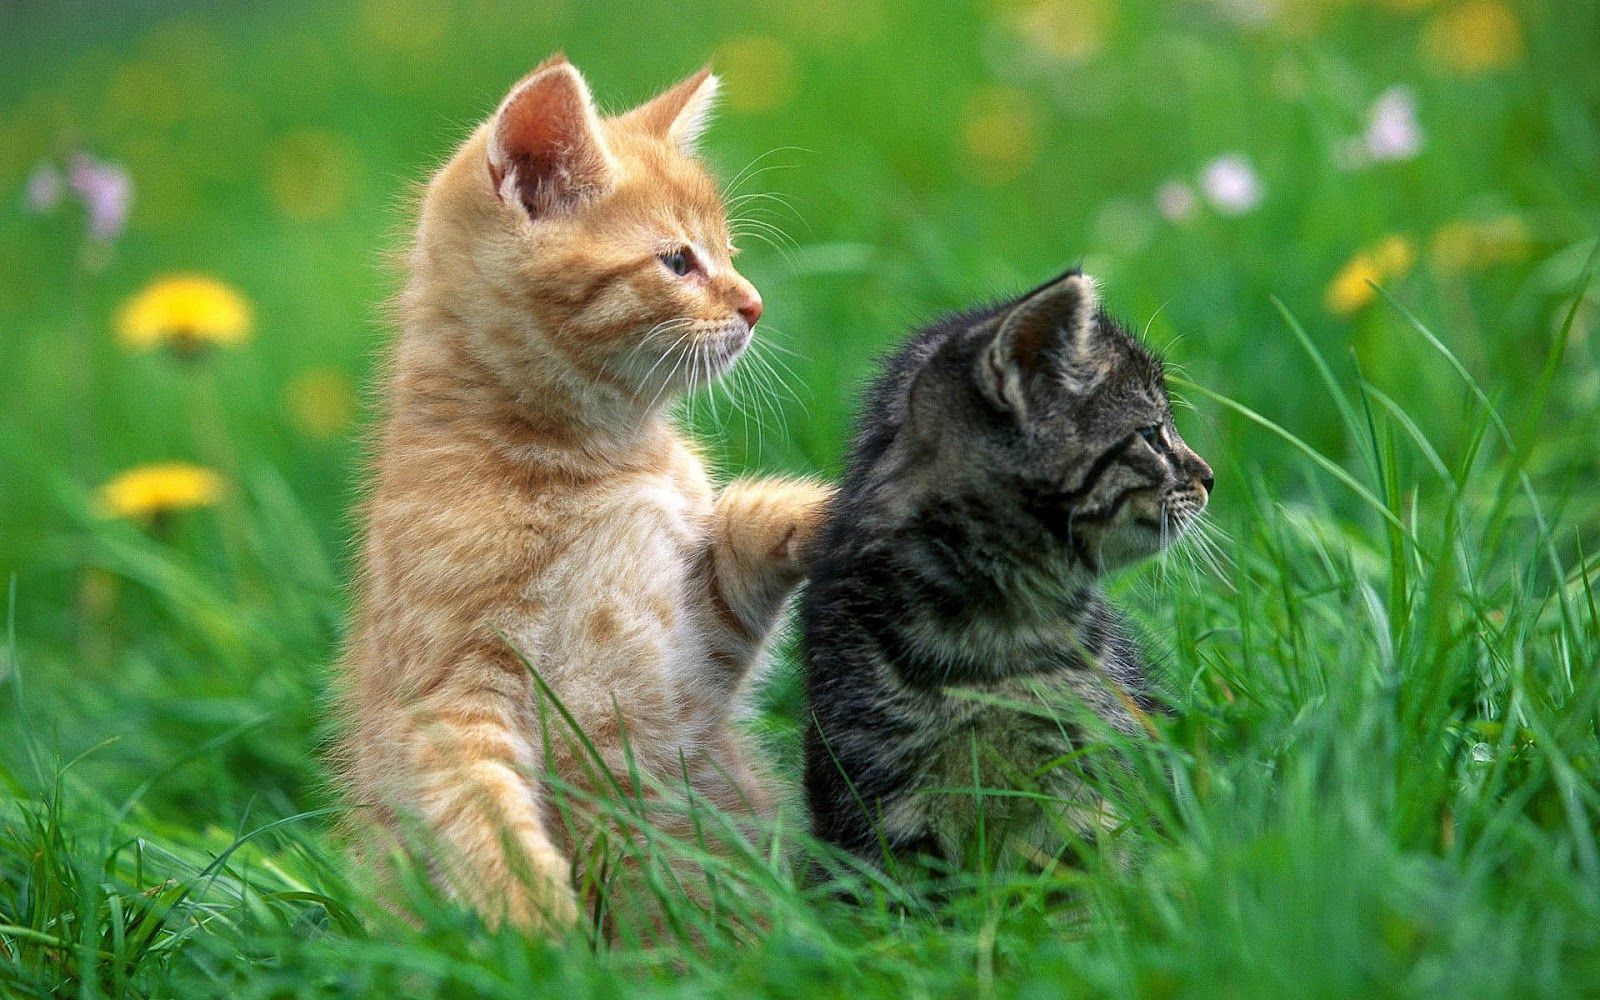 Picture Windows: Wallpaper of two cats in the grass